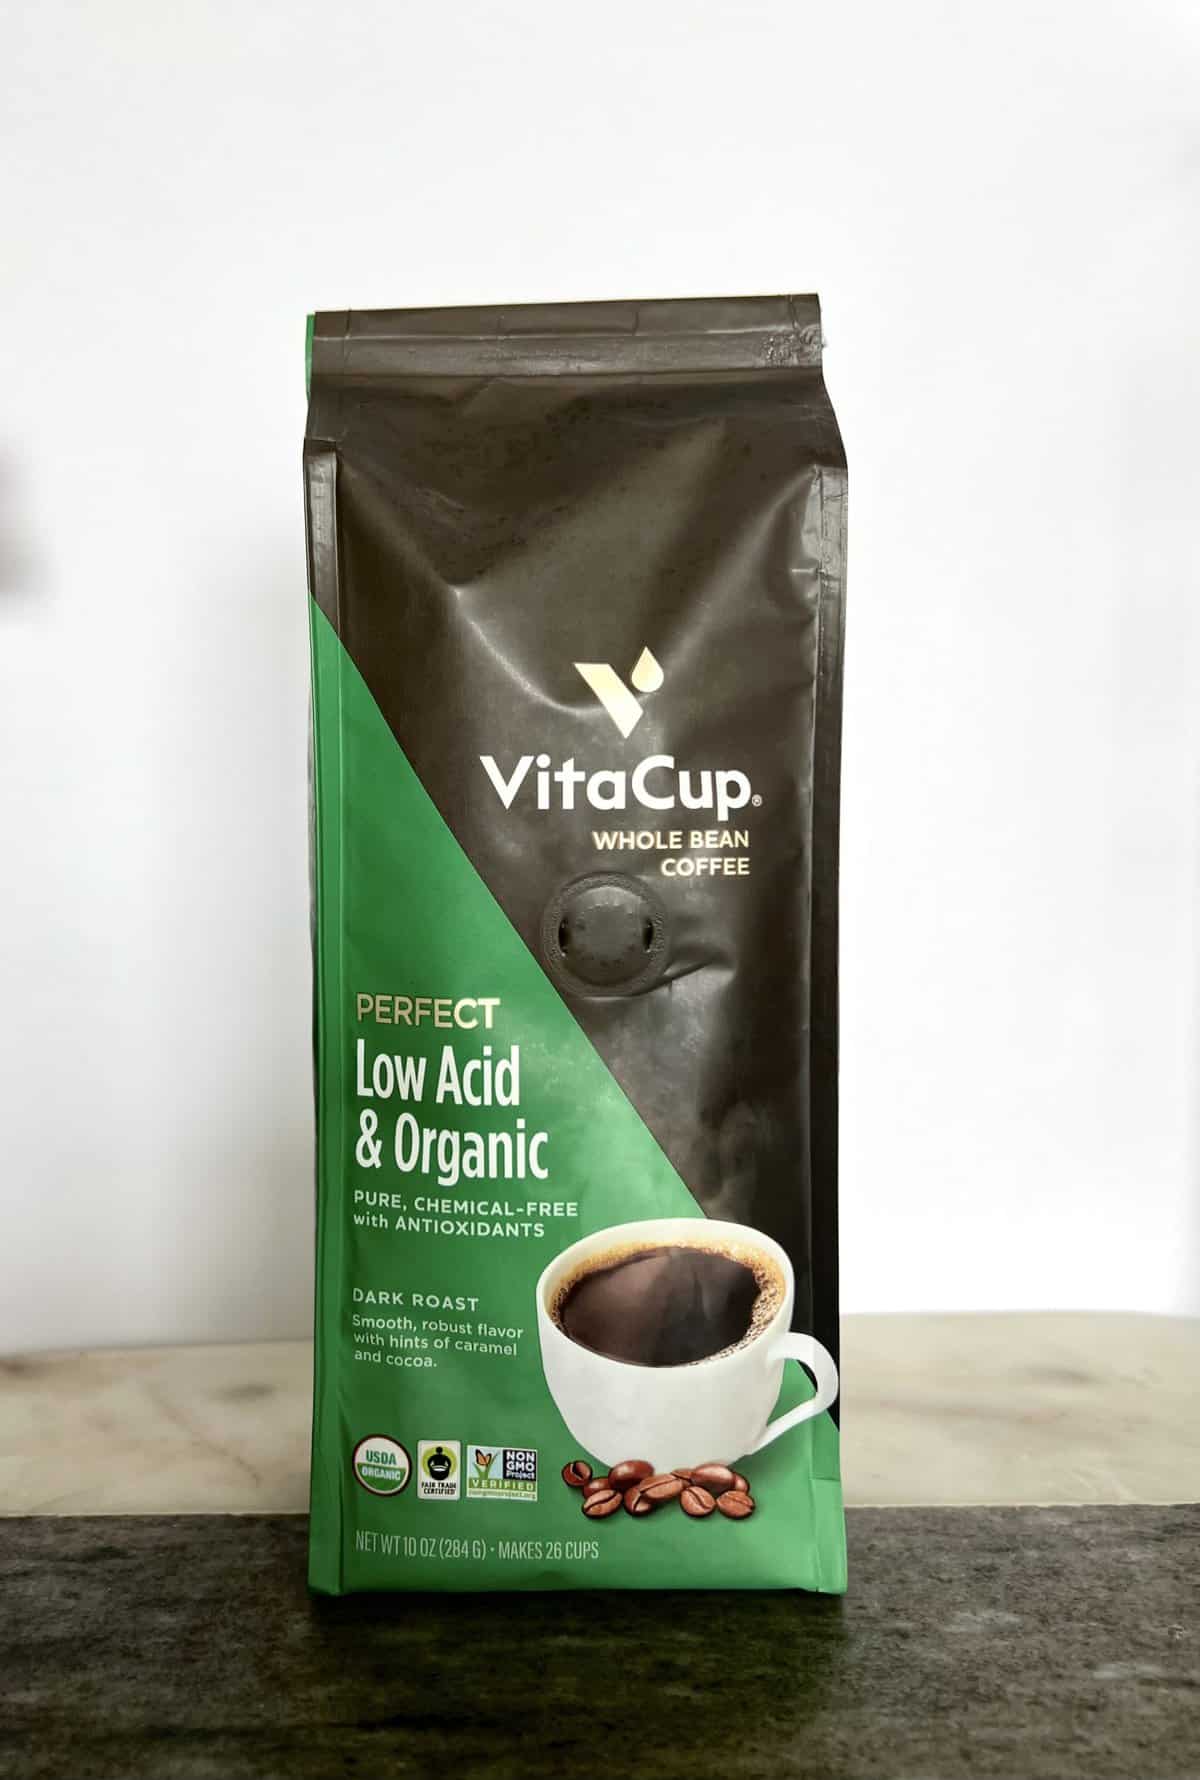 VitaCup whole bean low acid and organic Coffee scaled 1